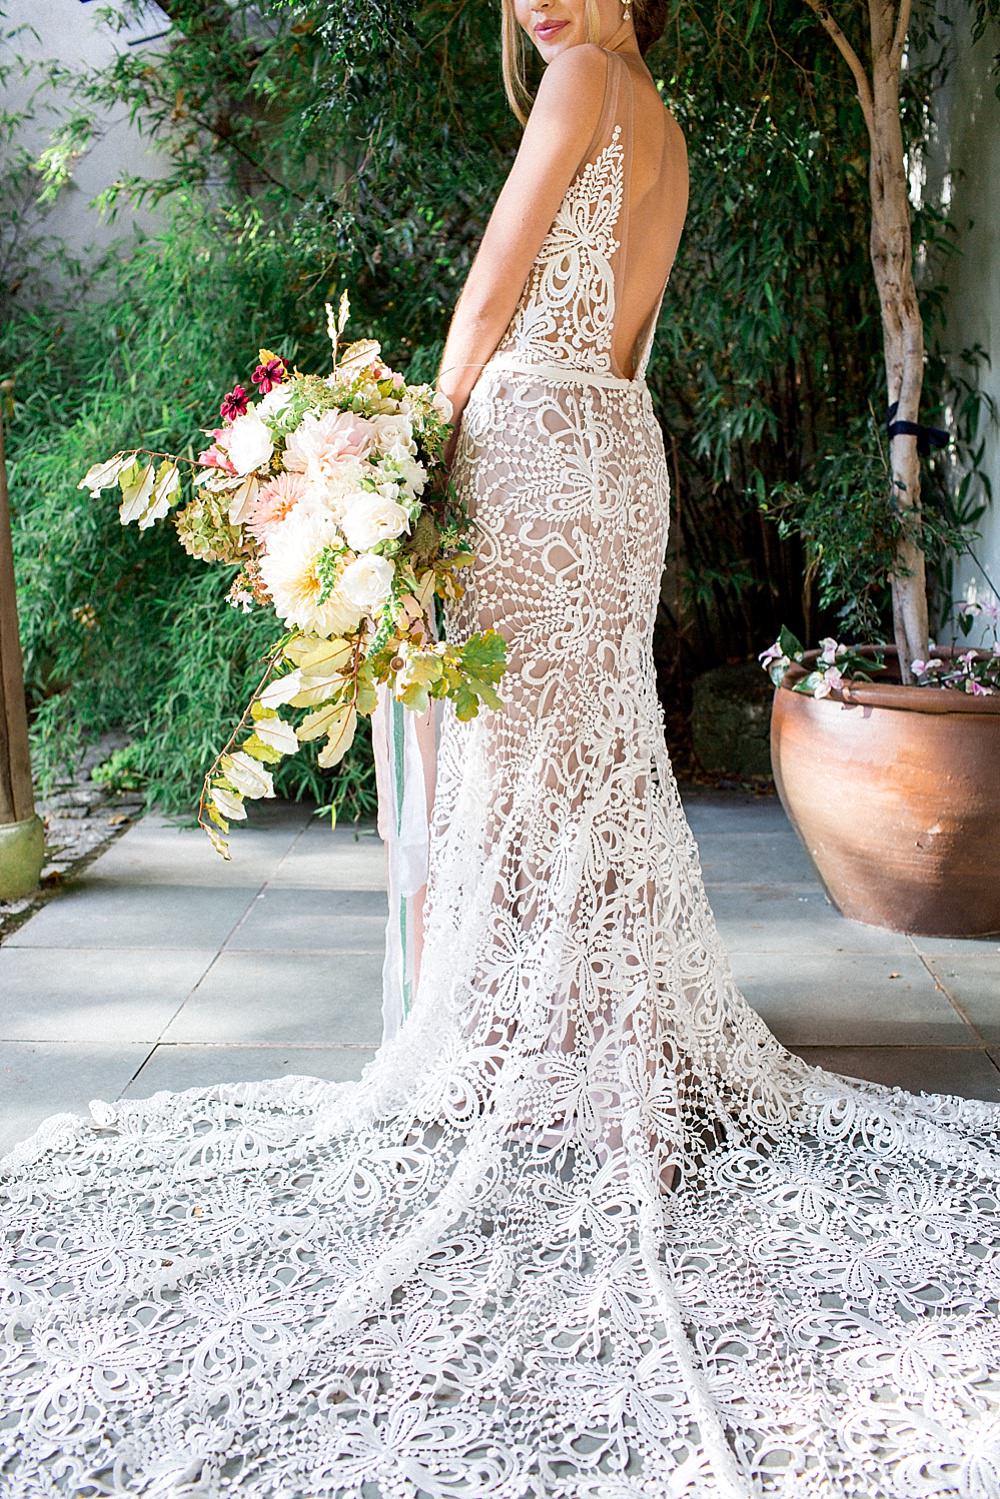 An open back and a train made the gown totally jaw dropping